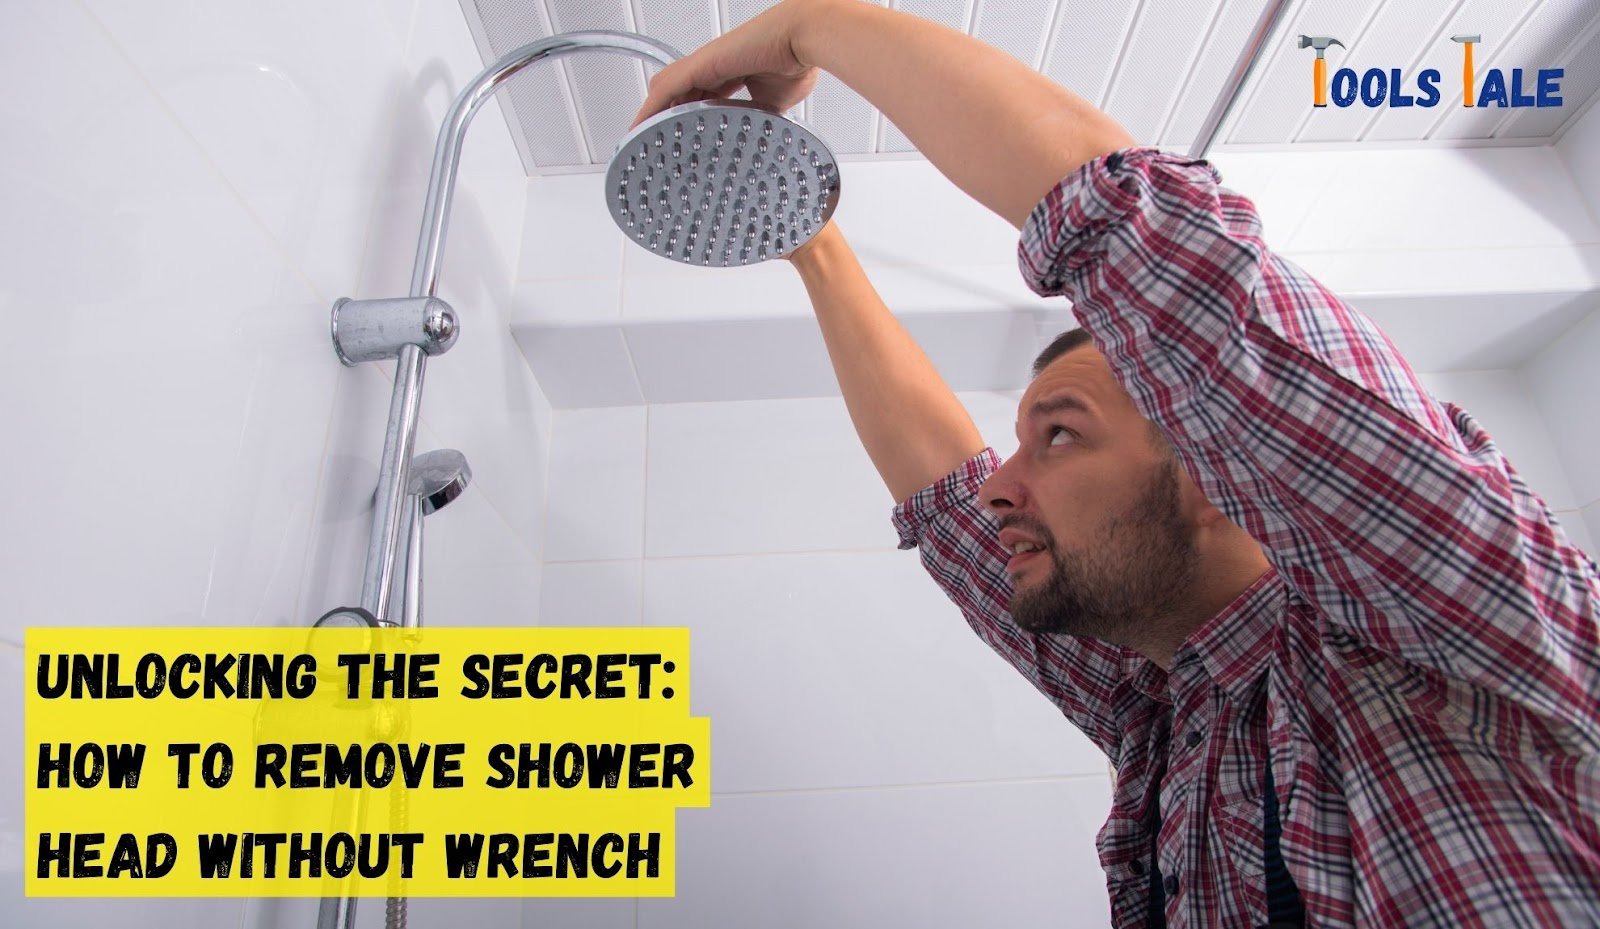 How to remove shower head without wrench